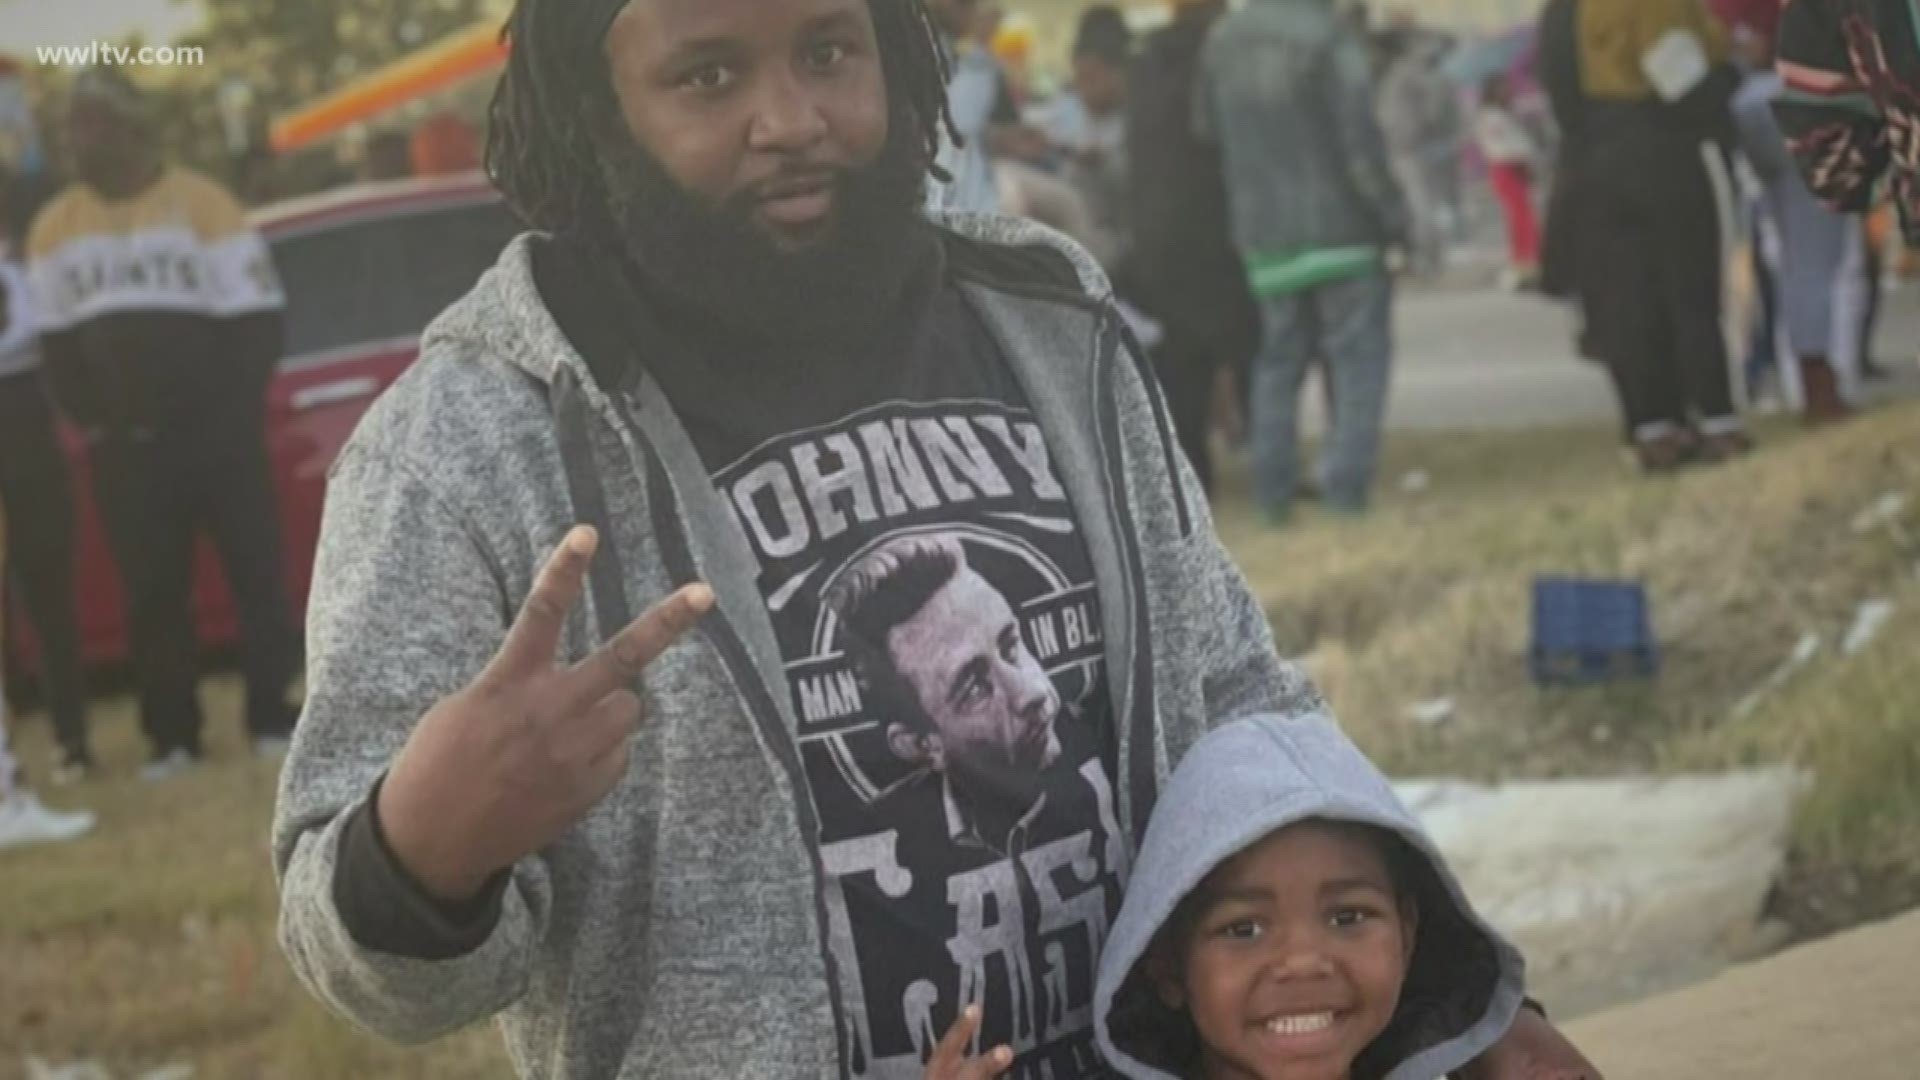 A father and his son were hit by a driver during a second line in the Seventh Ward. His son's leg had to be amputated. Now, he's speaking out.